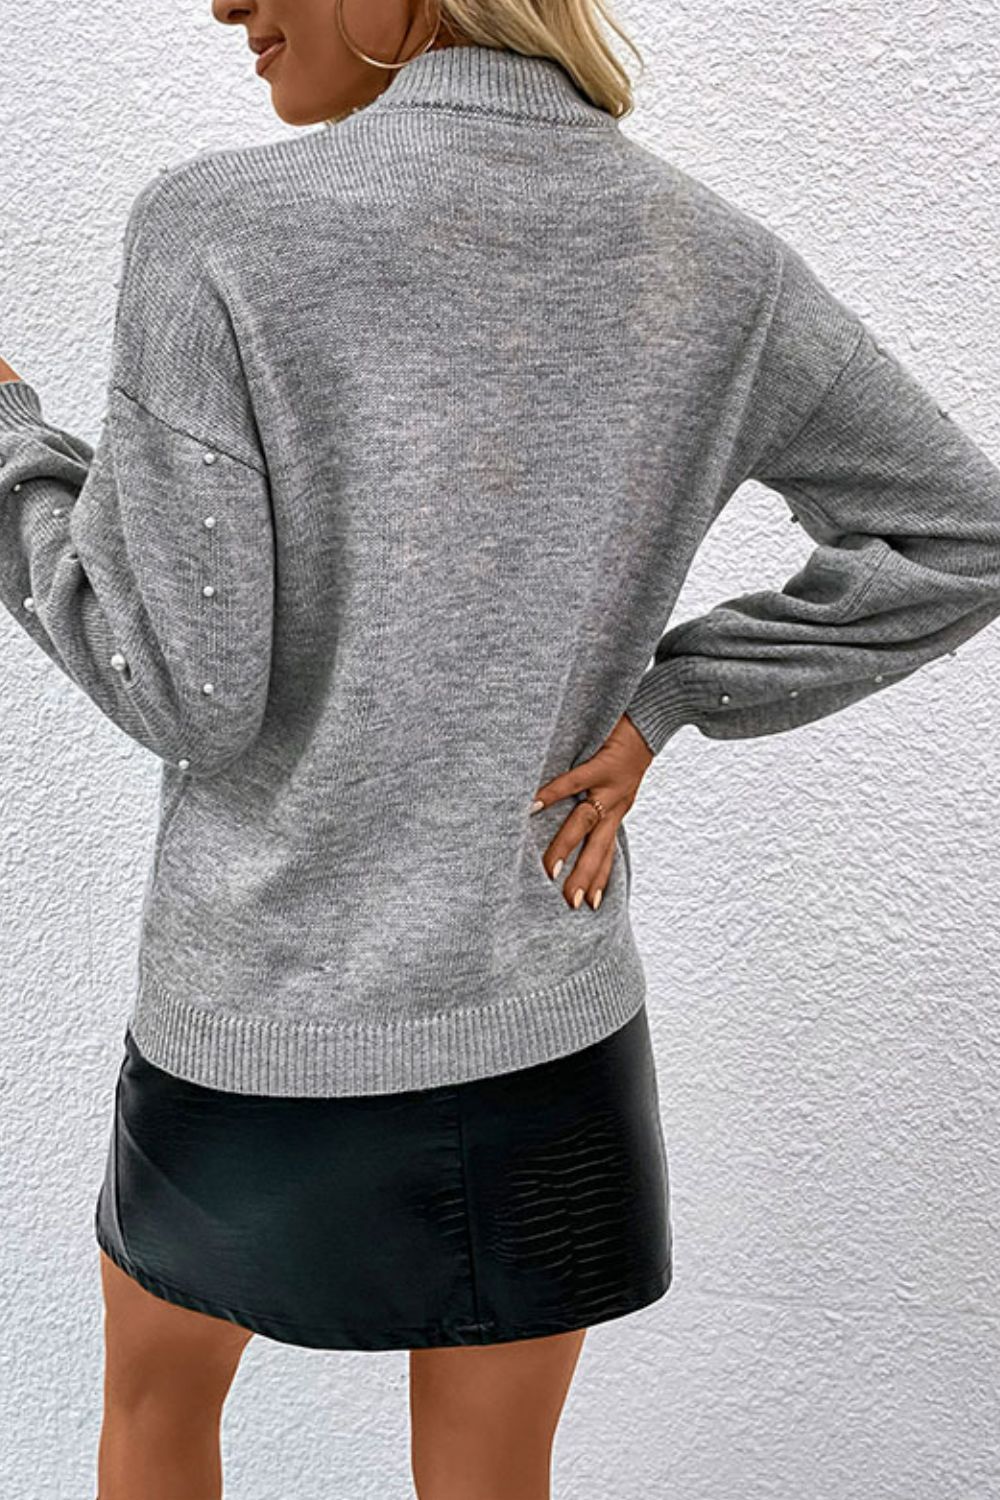 Pearl Dropped Shoulder Ribbed Trim Sweater  | KIKI COUTURE-Women's Clothing, Designer Fashions, Shoes, Bags